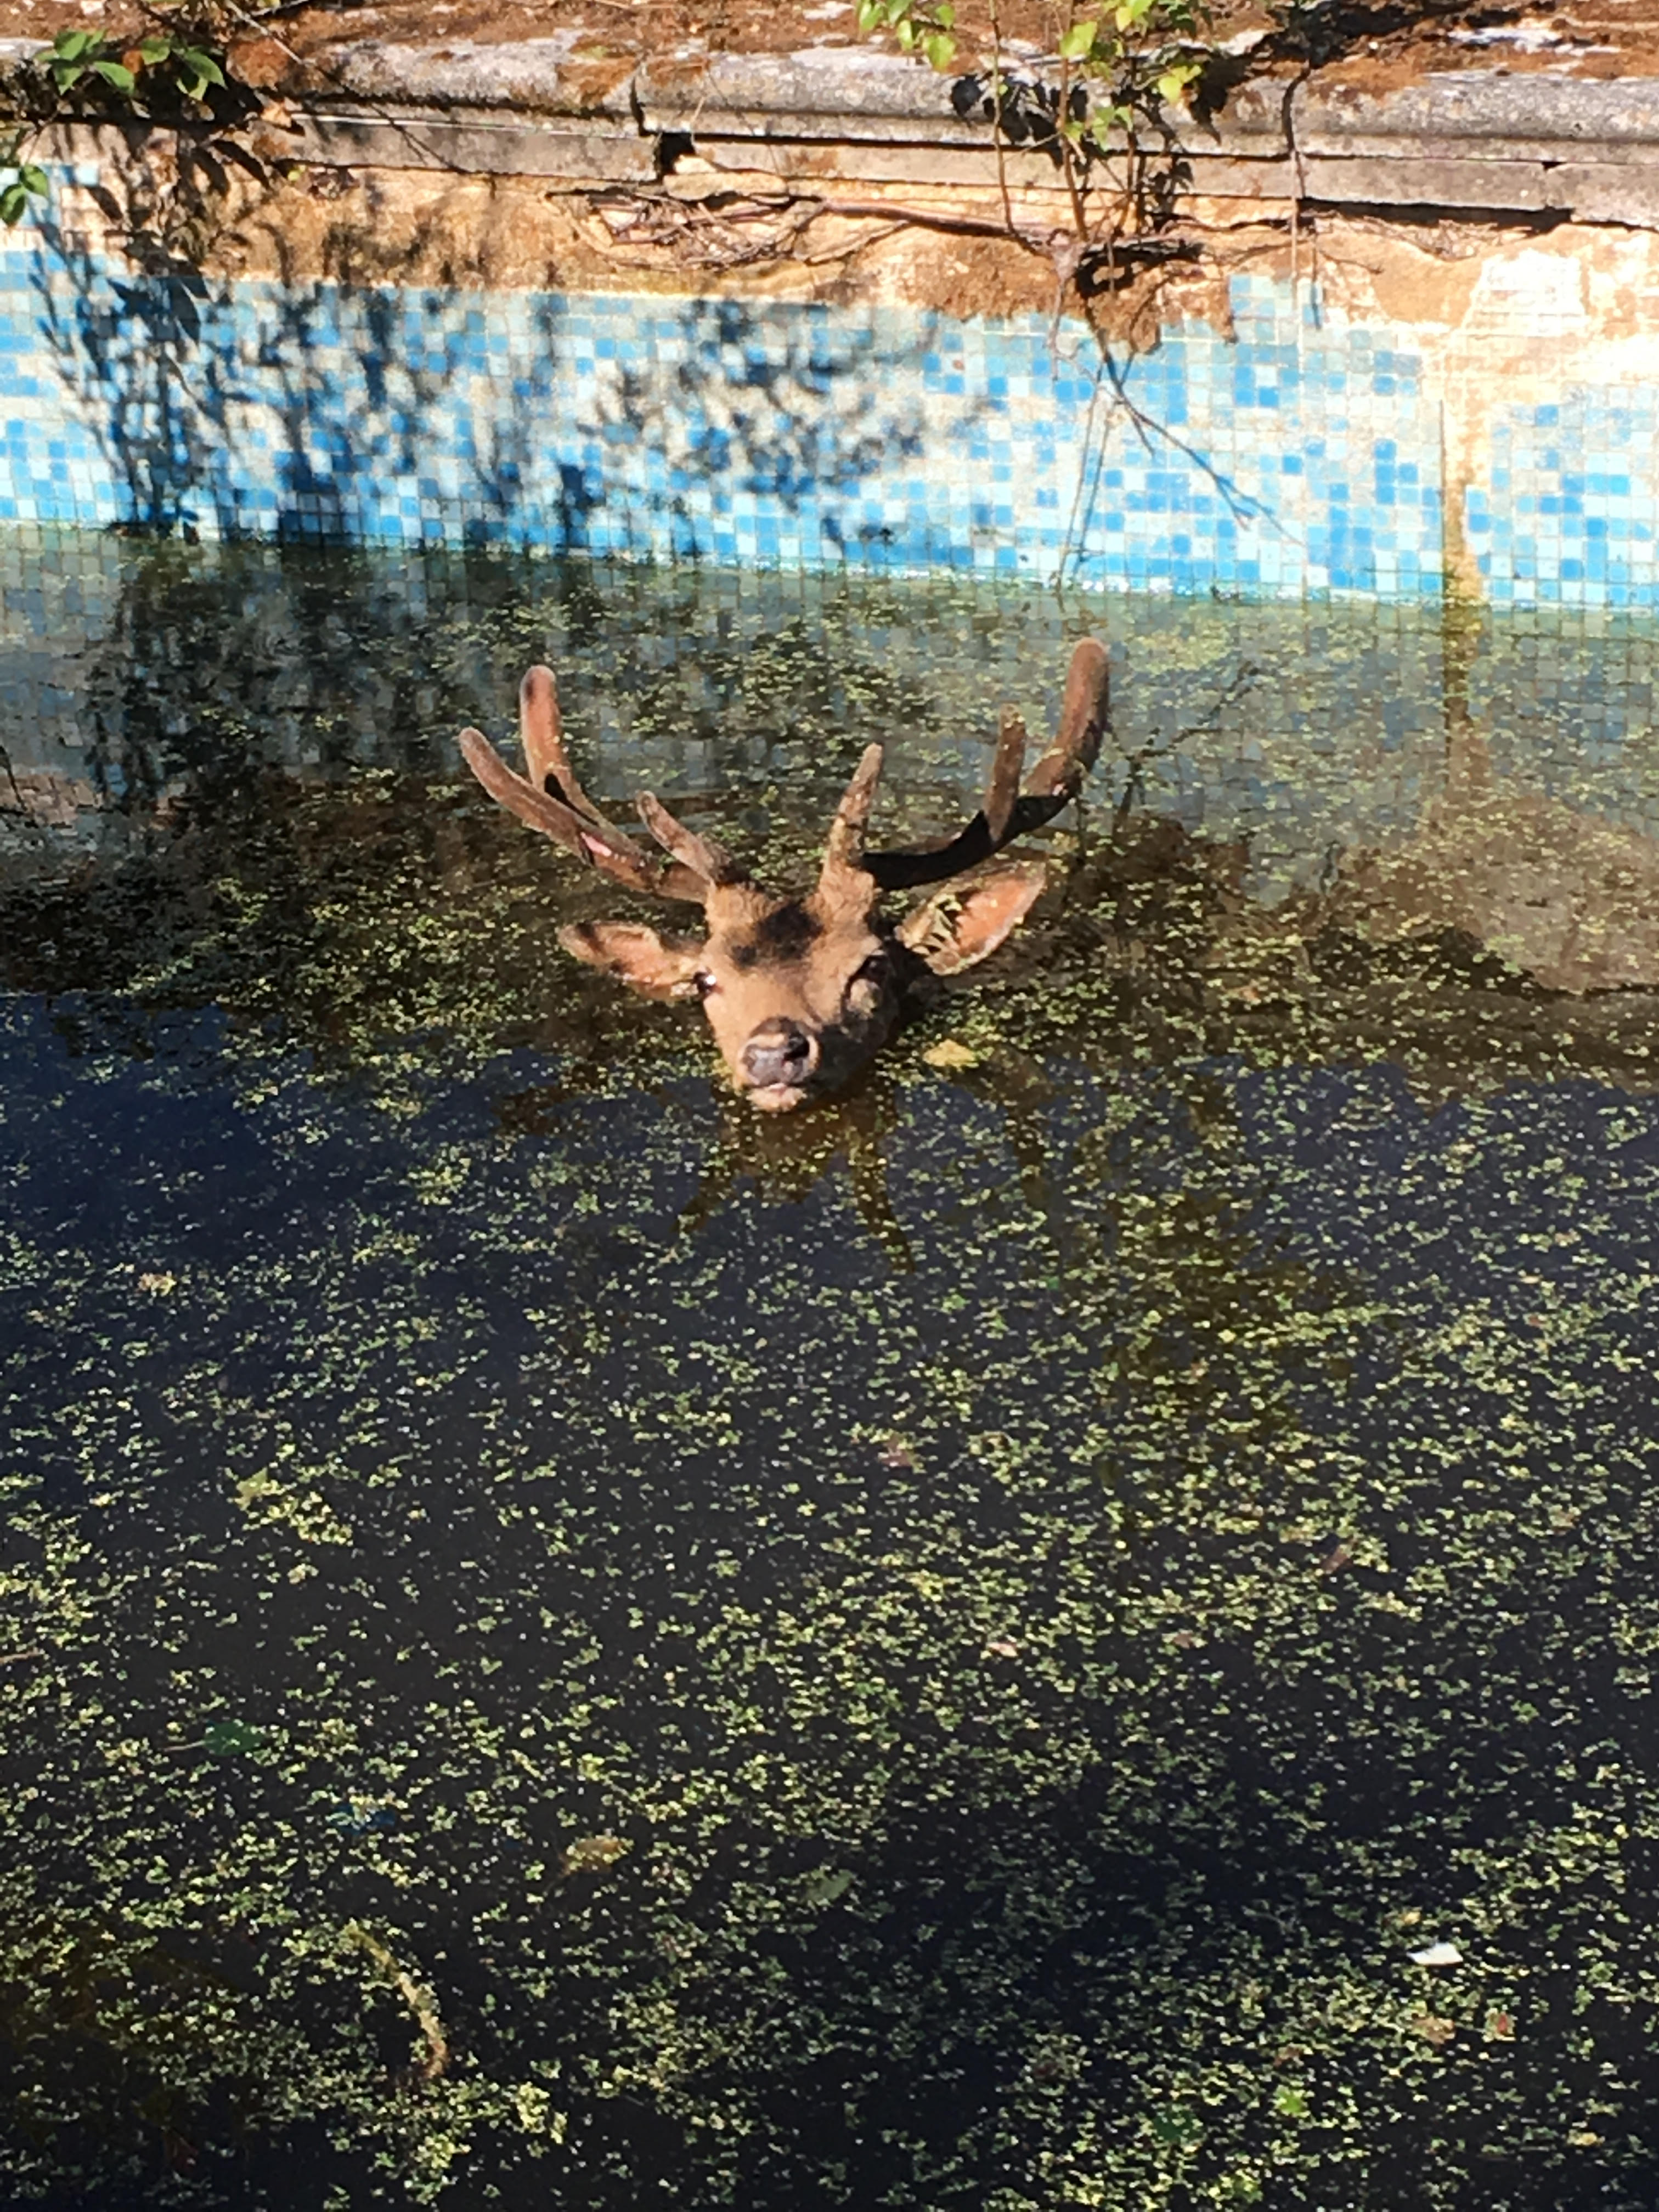 Stag spotted in disused pool rescued by RSPCA officers